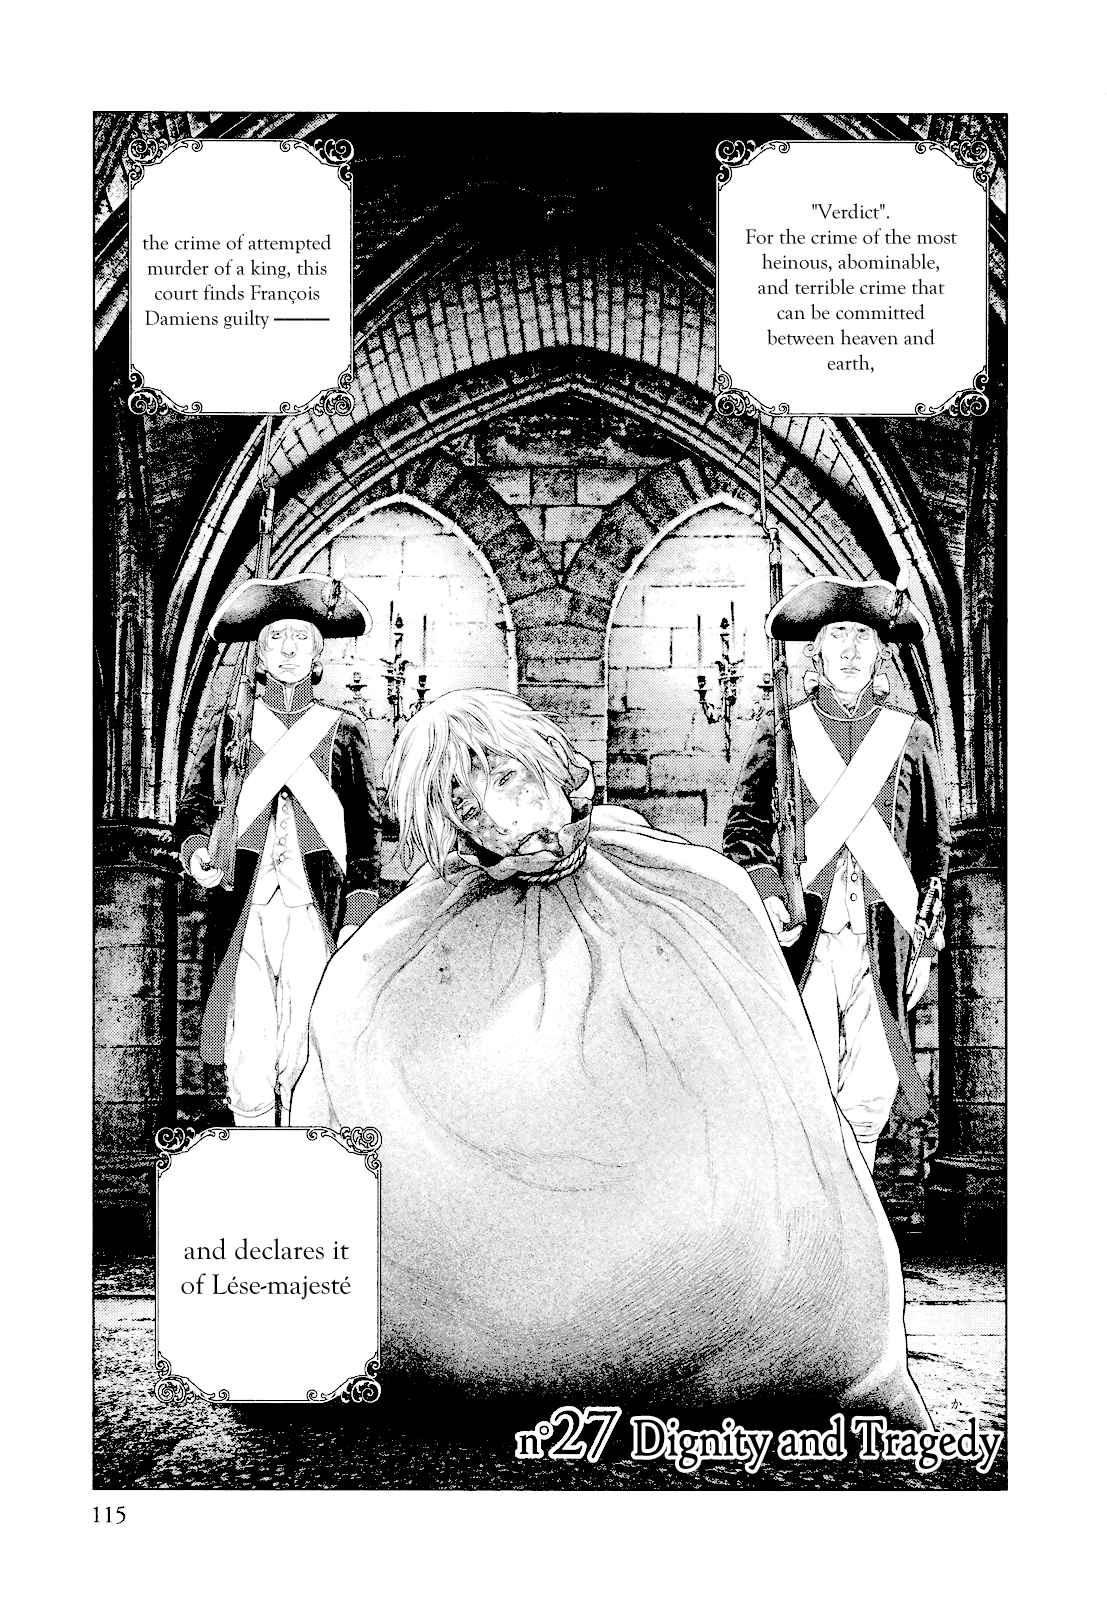 Innocent Vol. 3 Ch. 27 Dignity and Tragedy